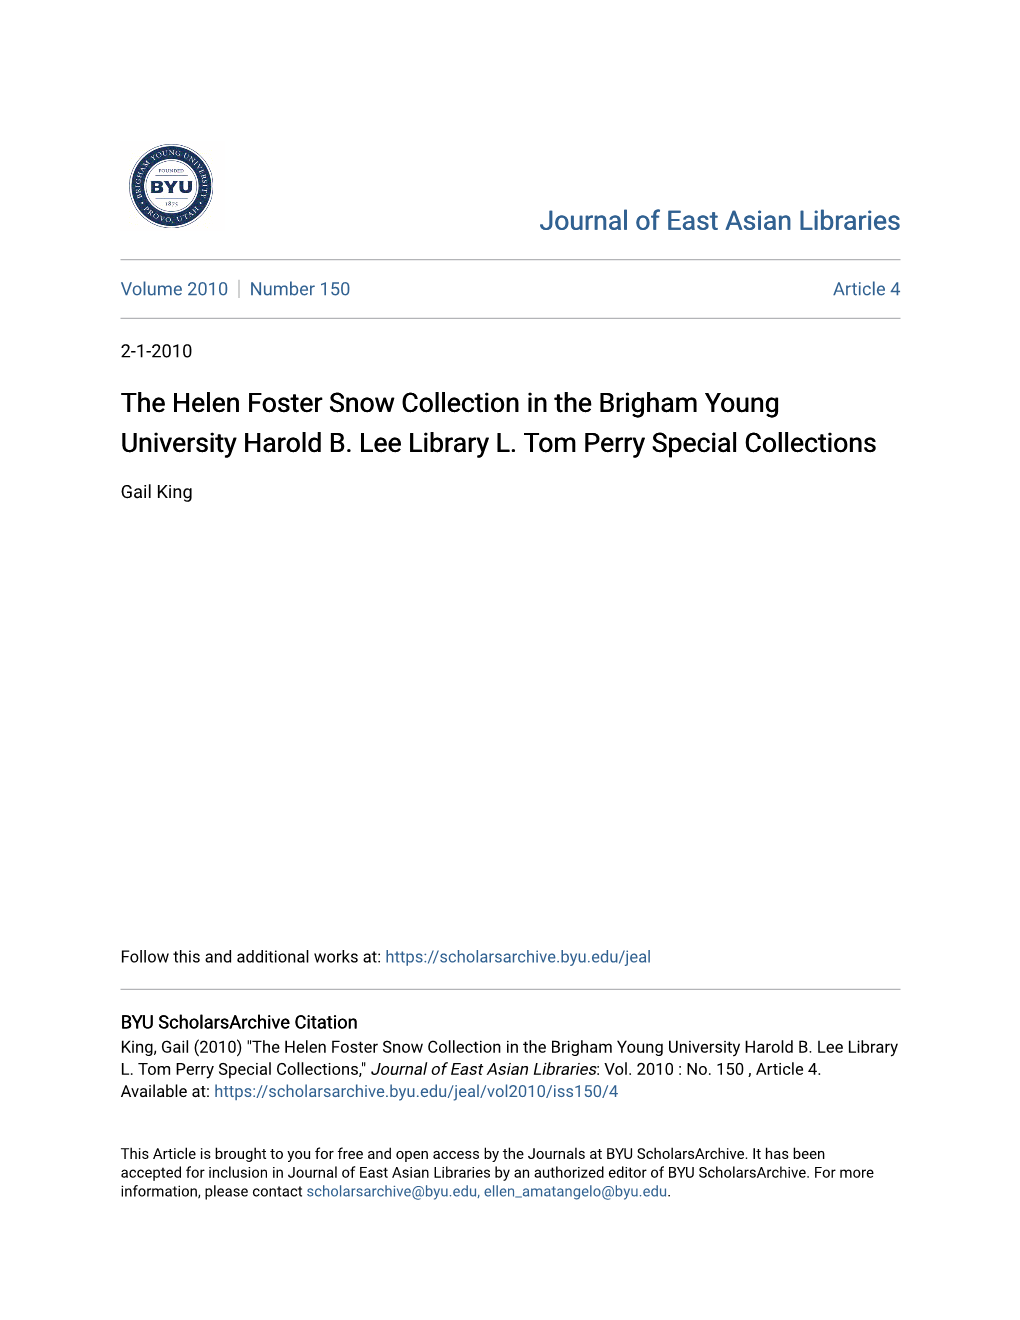 The Helen Foster Snow Collection in the Brigham Young University Harold B